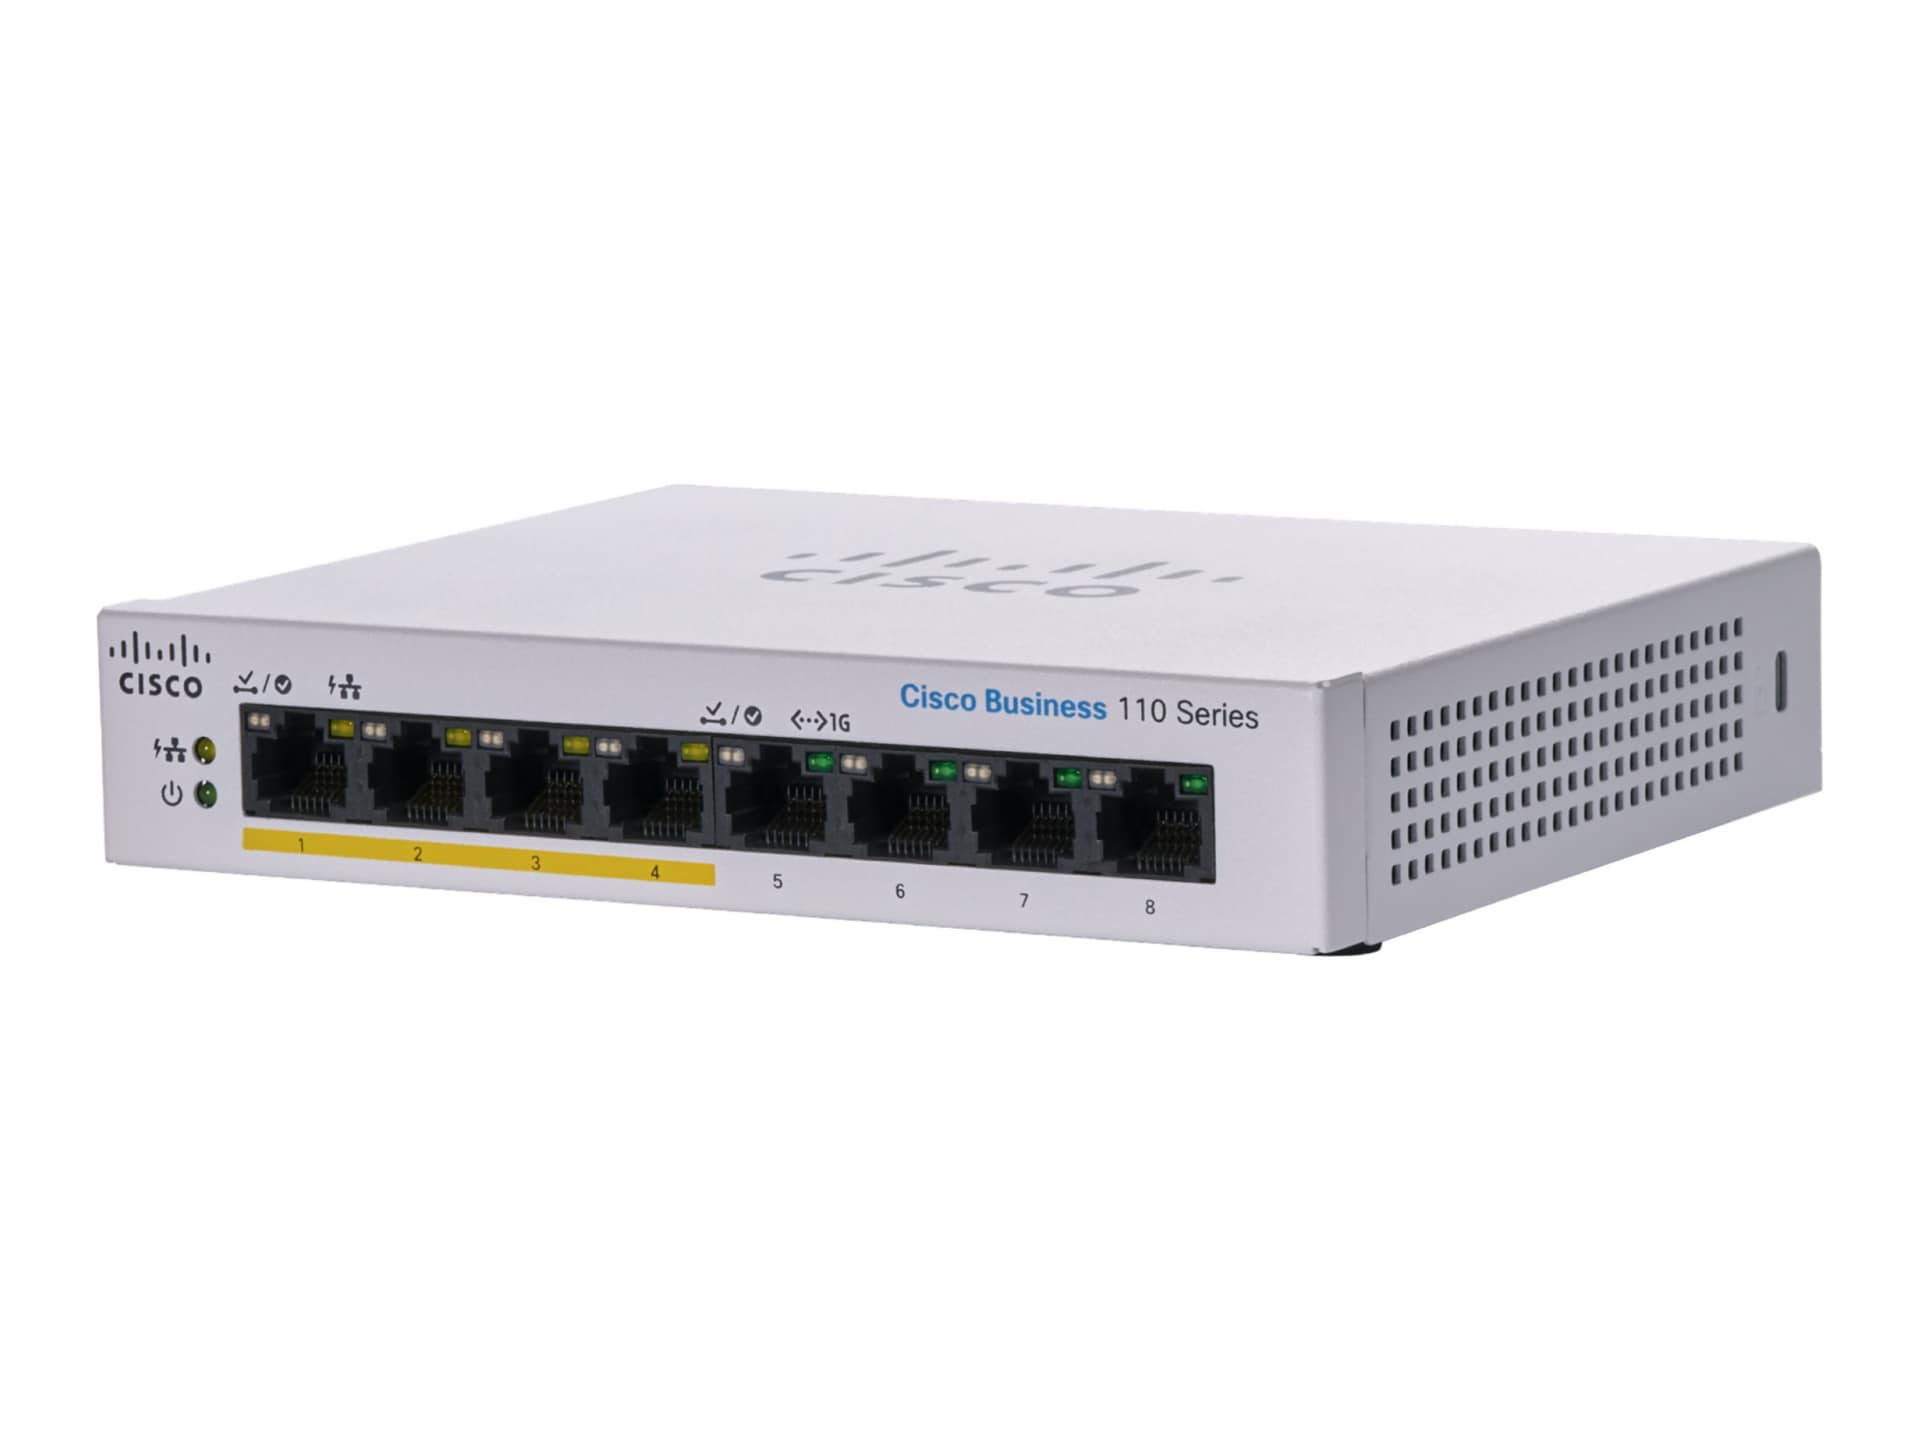 Cisco Business 110 Series 110-8PP-D - switch - 8 ports - unmanaged - rack-mountable